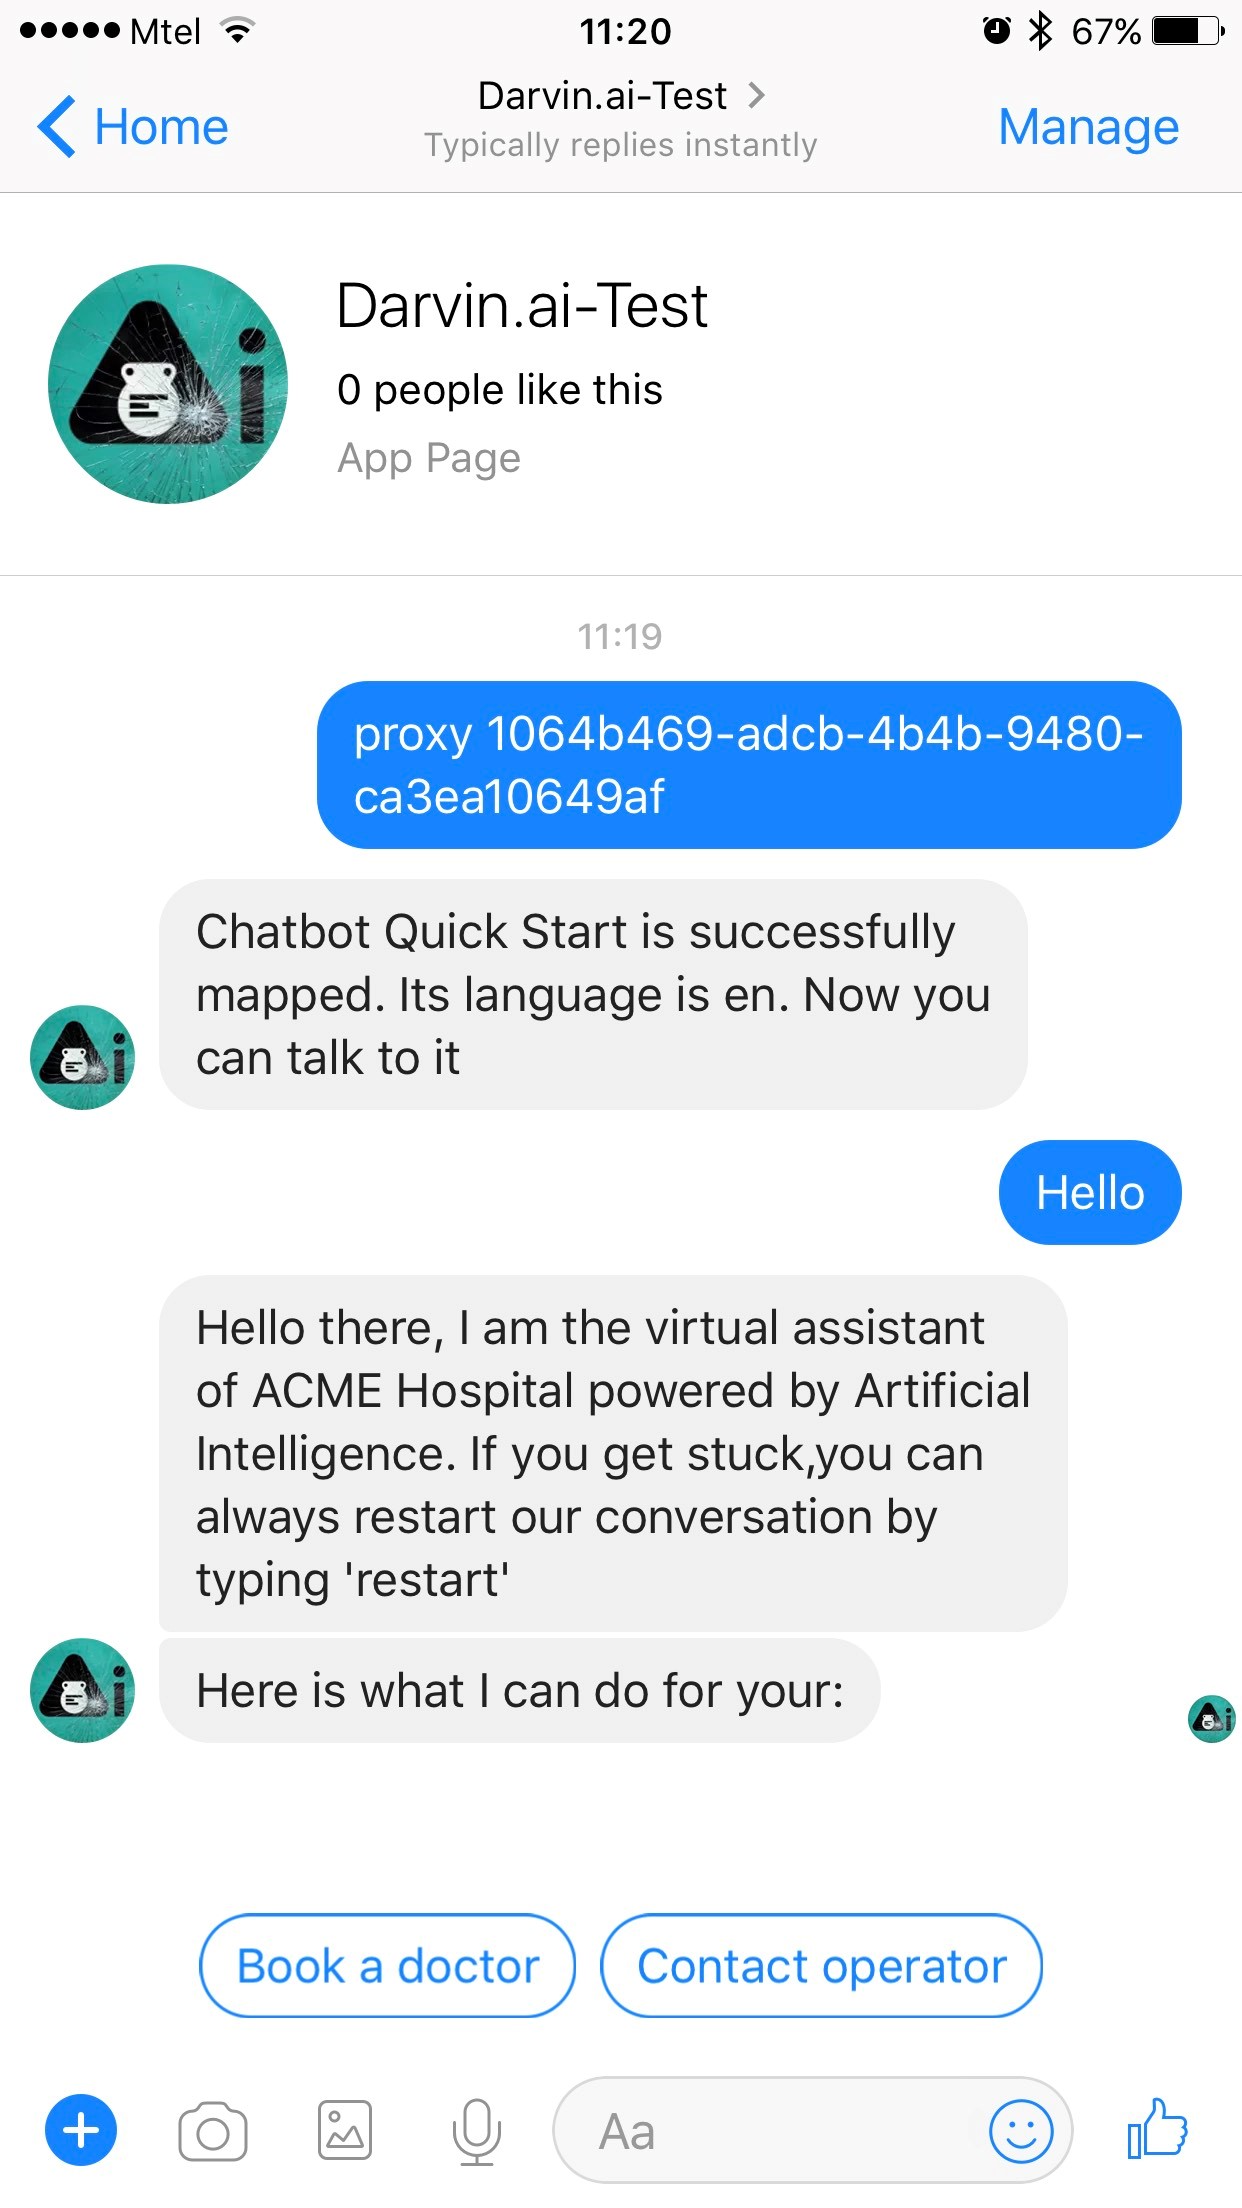 Getting started conversation with NativeChat